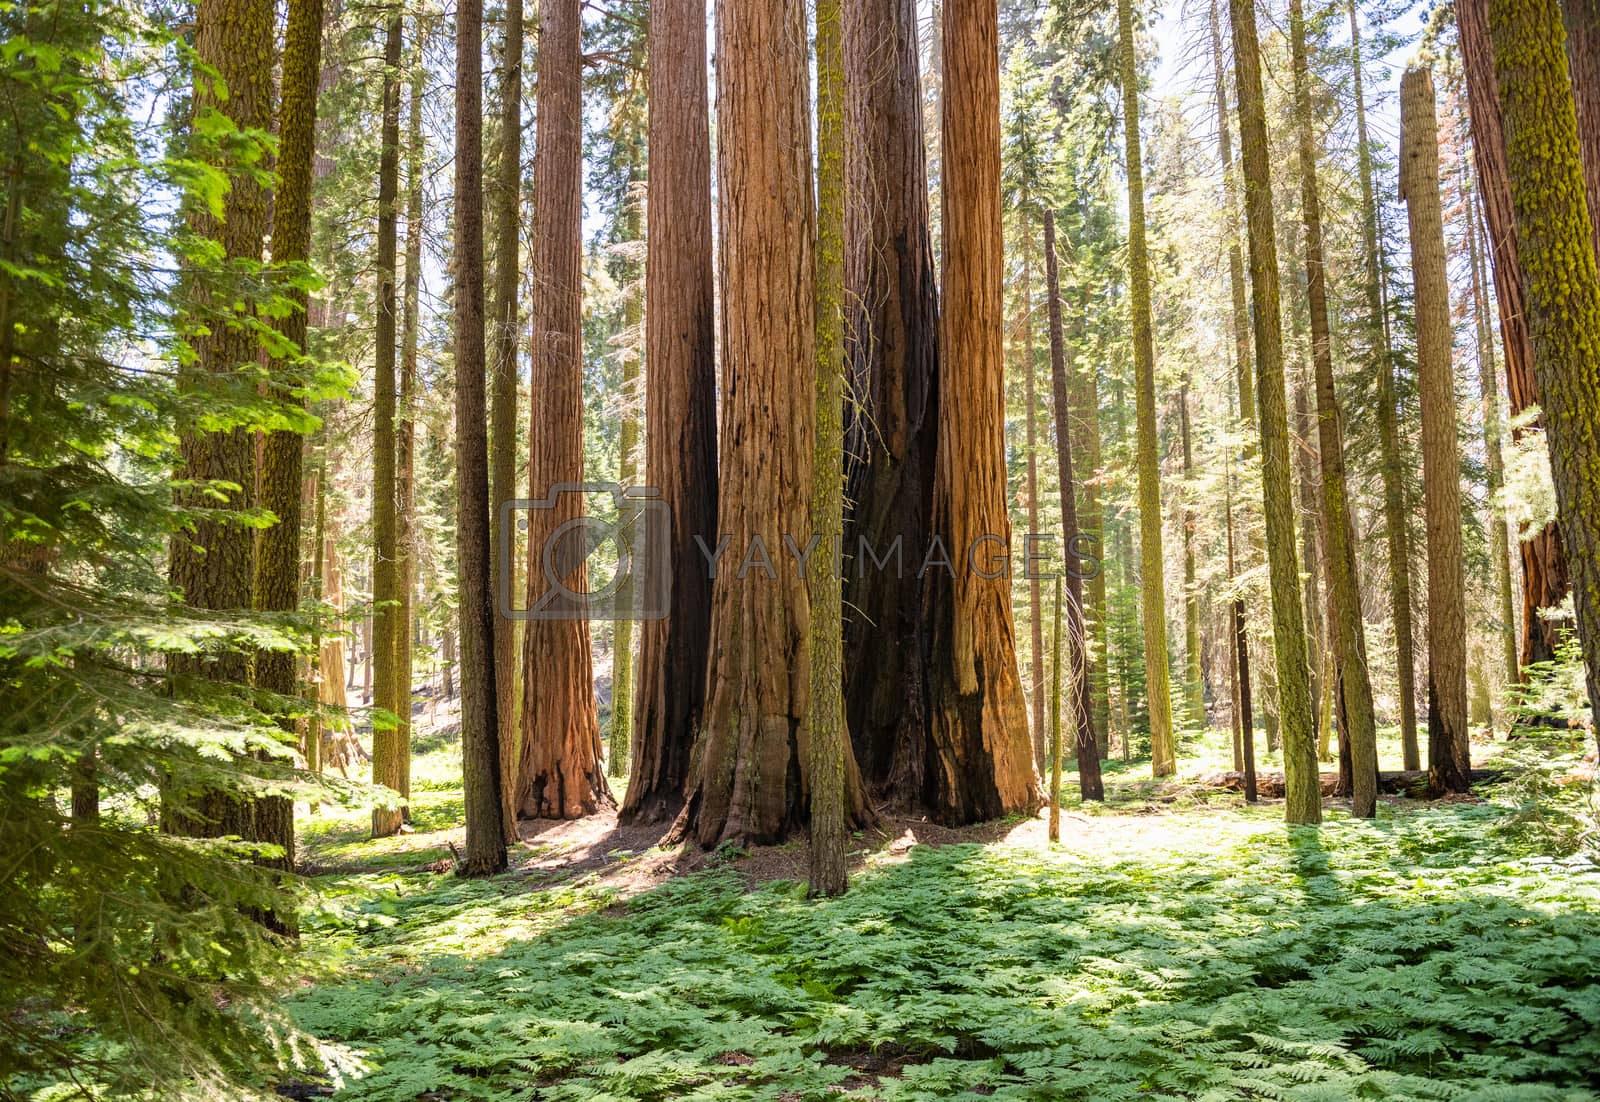 Royalty free image of Trunks of giant sequoias in Sequoia National Park, California by Njean